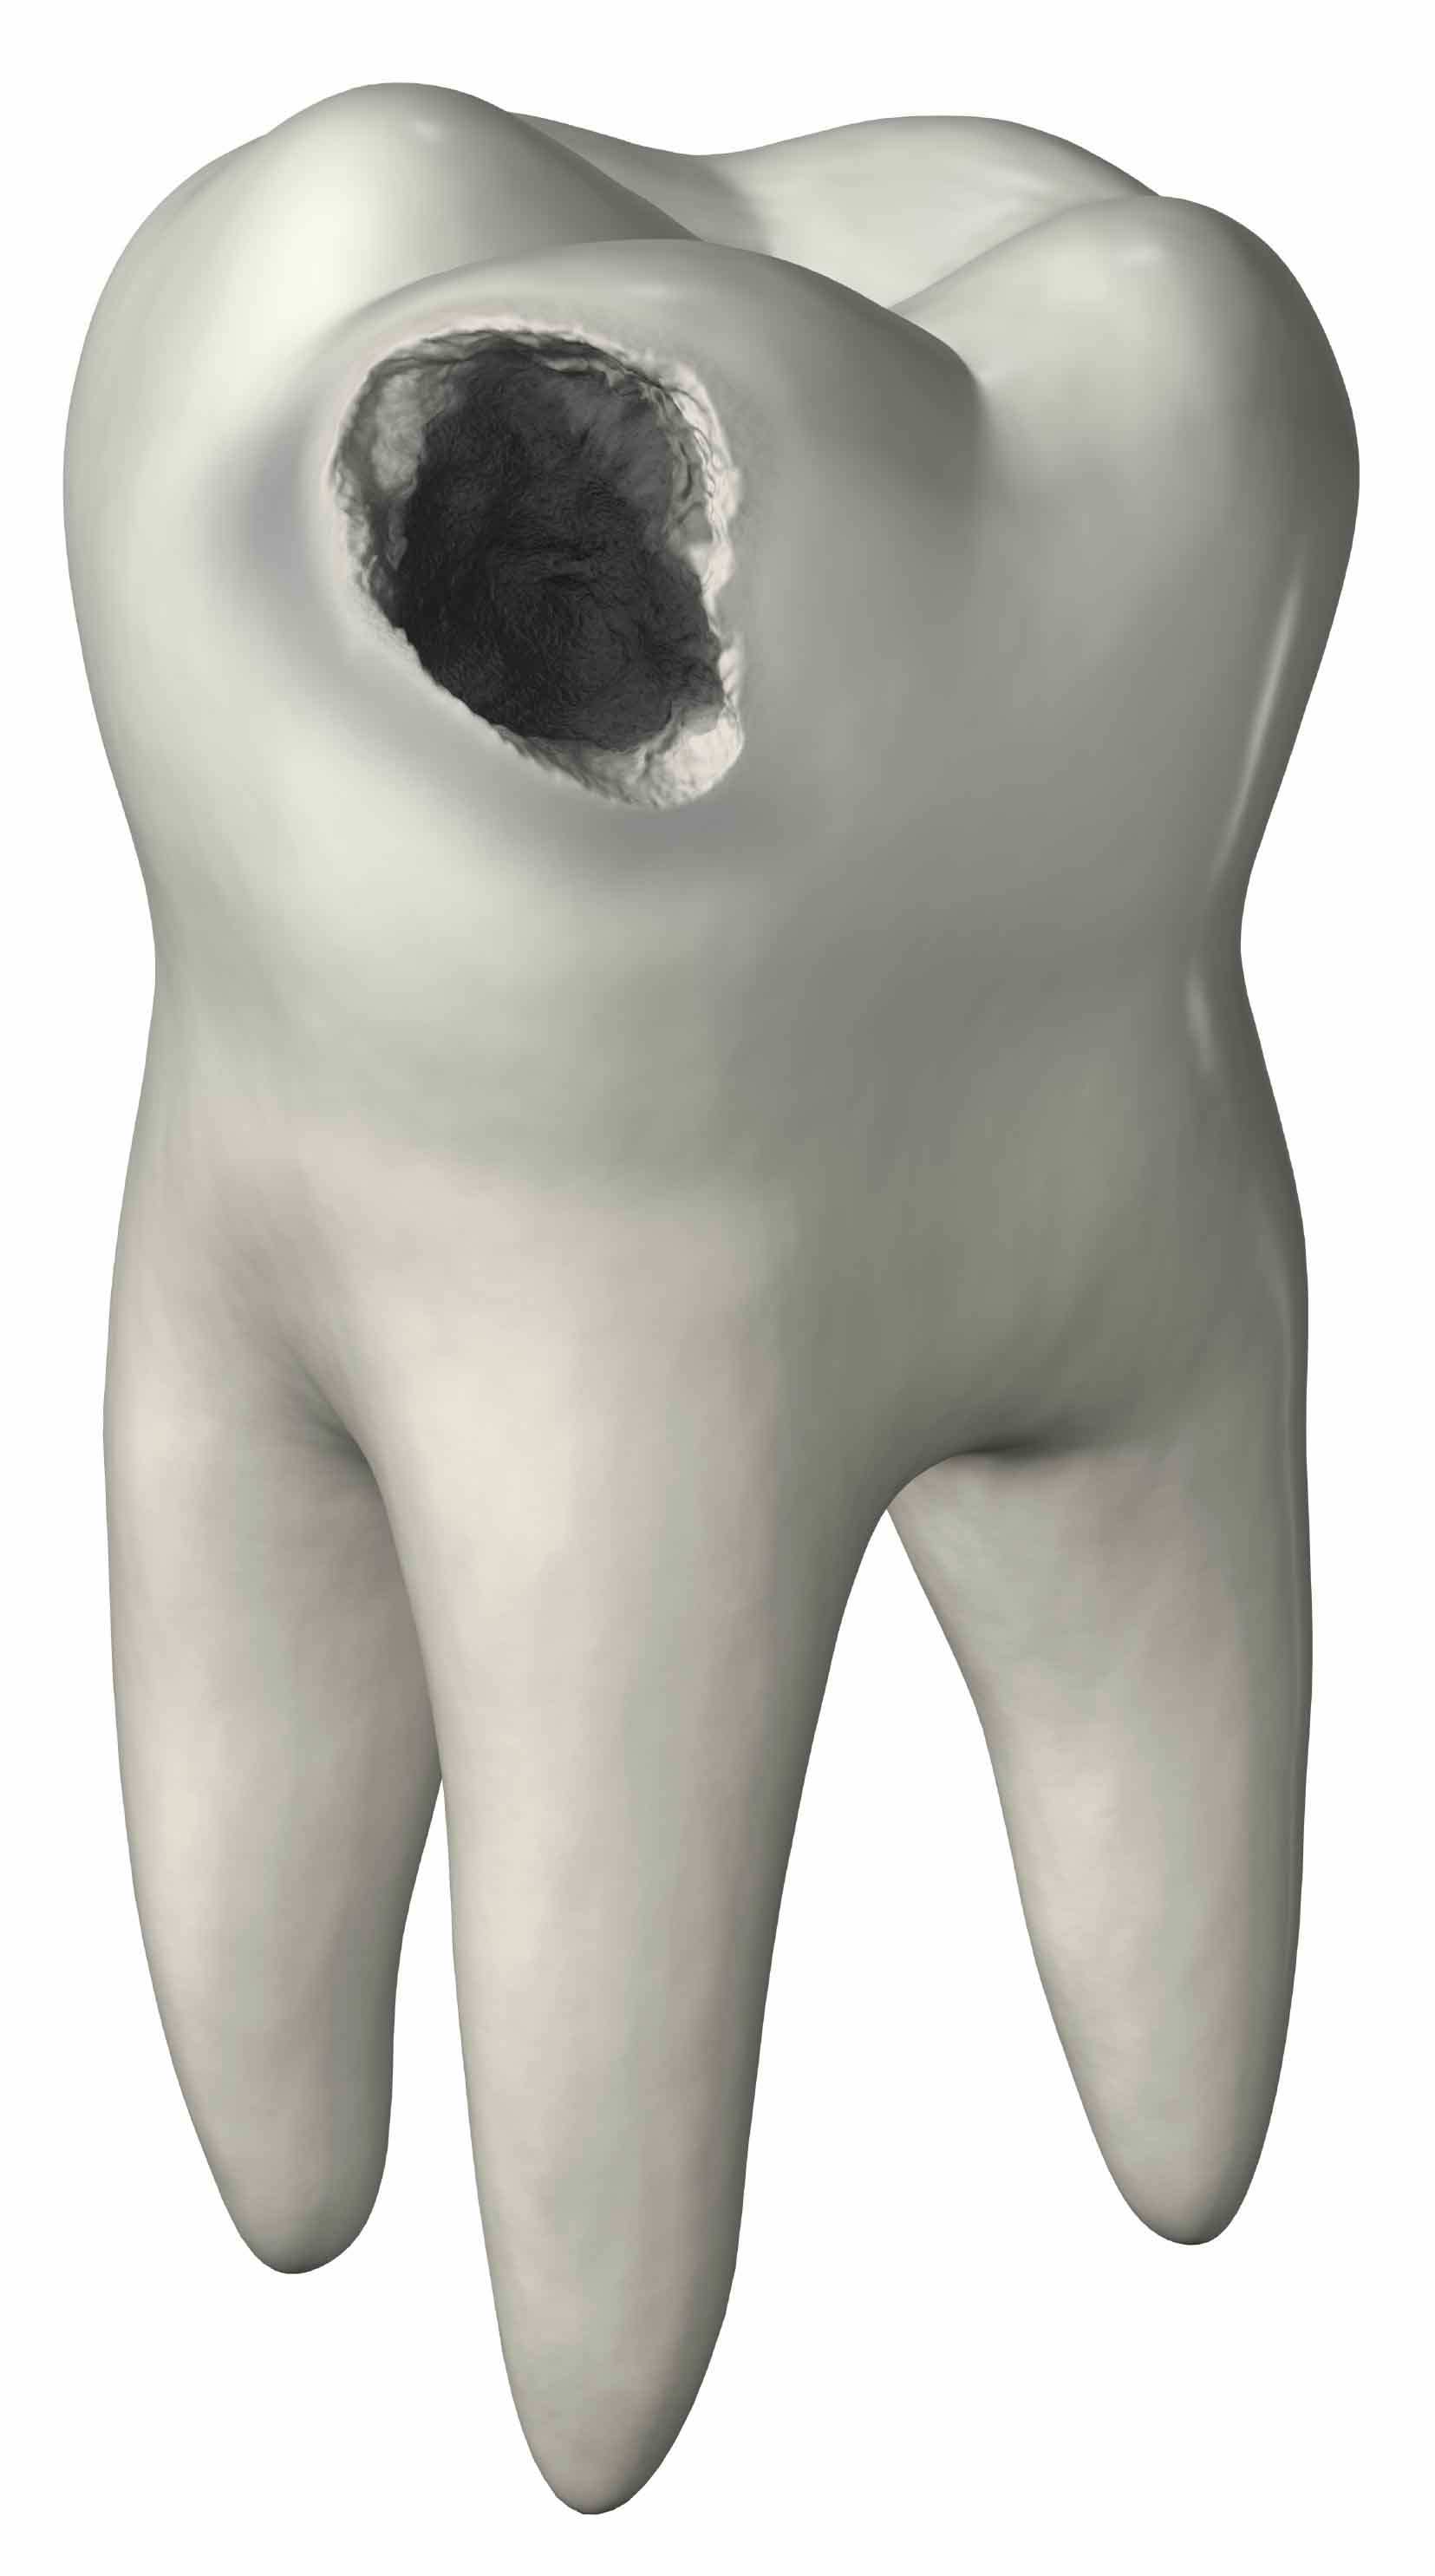 tooth with caries